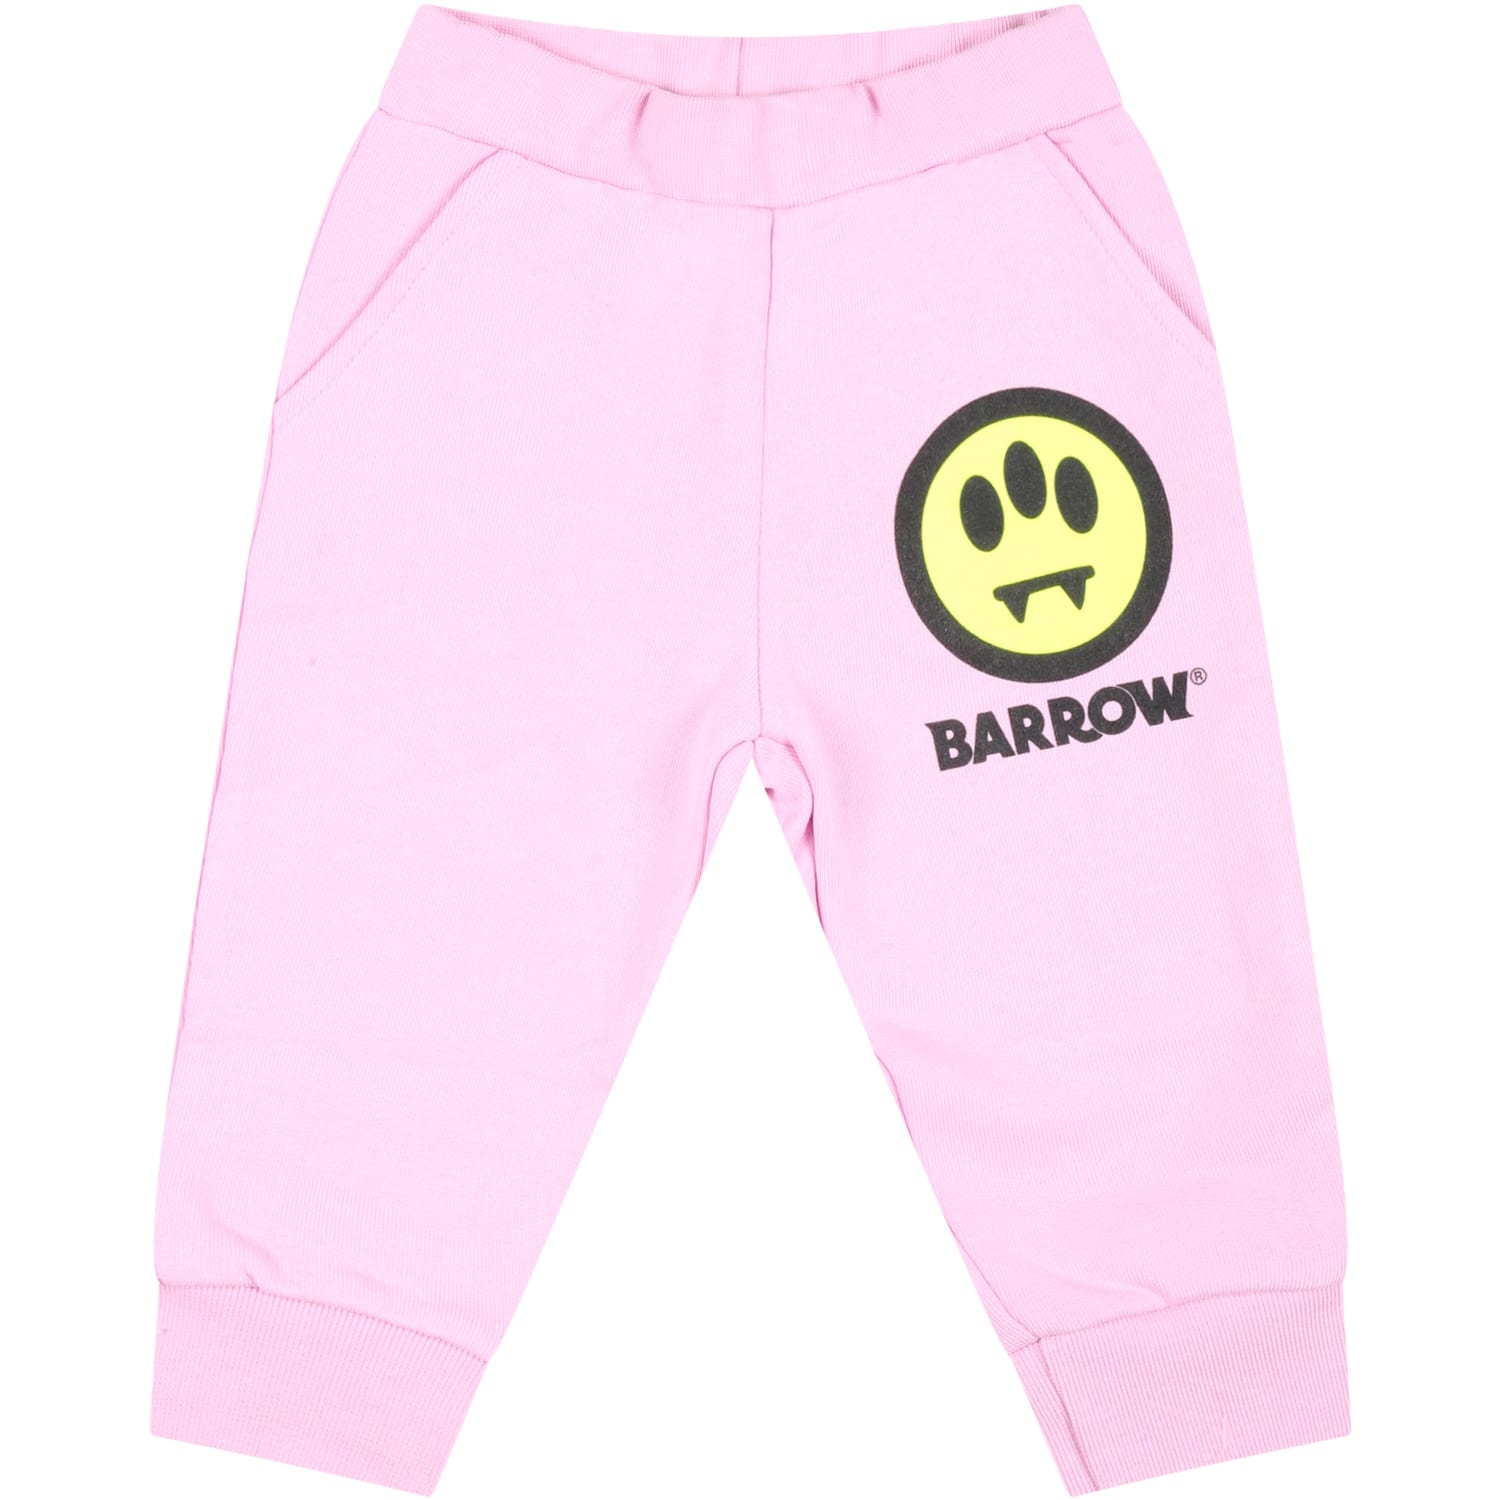 BARROW PINK SWEATPANTS FOR BABY GIRL WITH LOGO